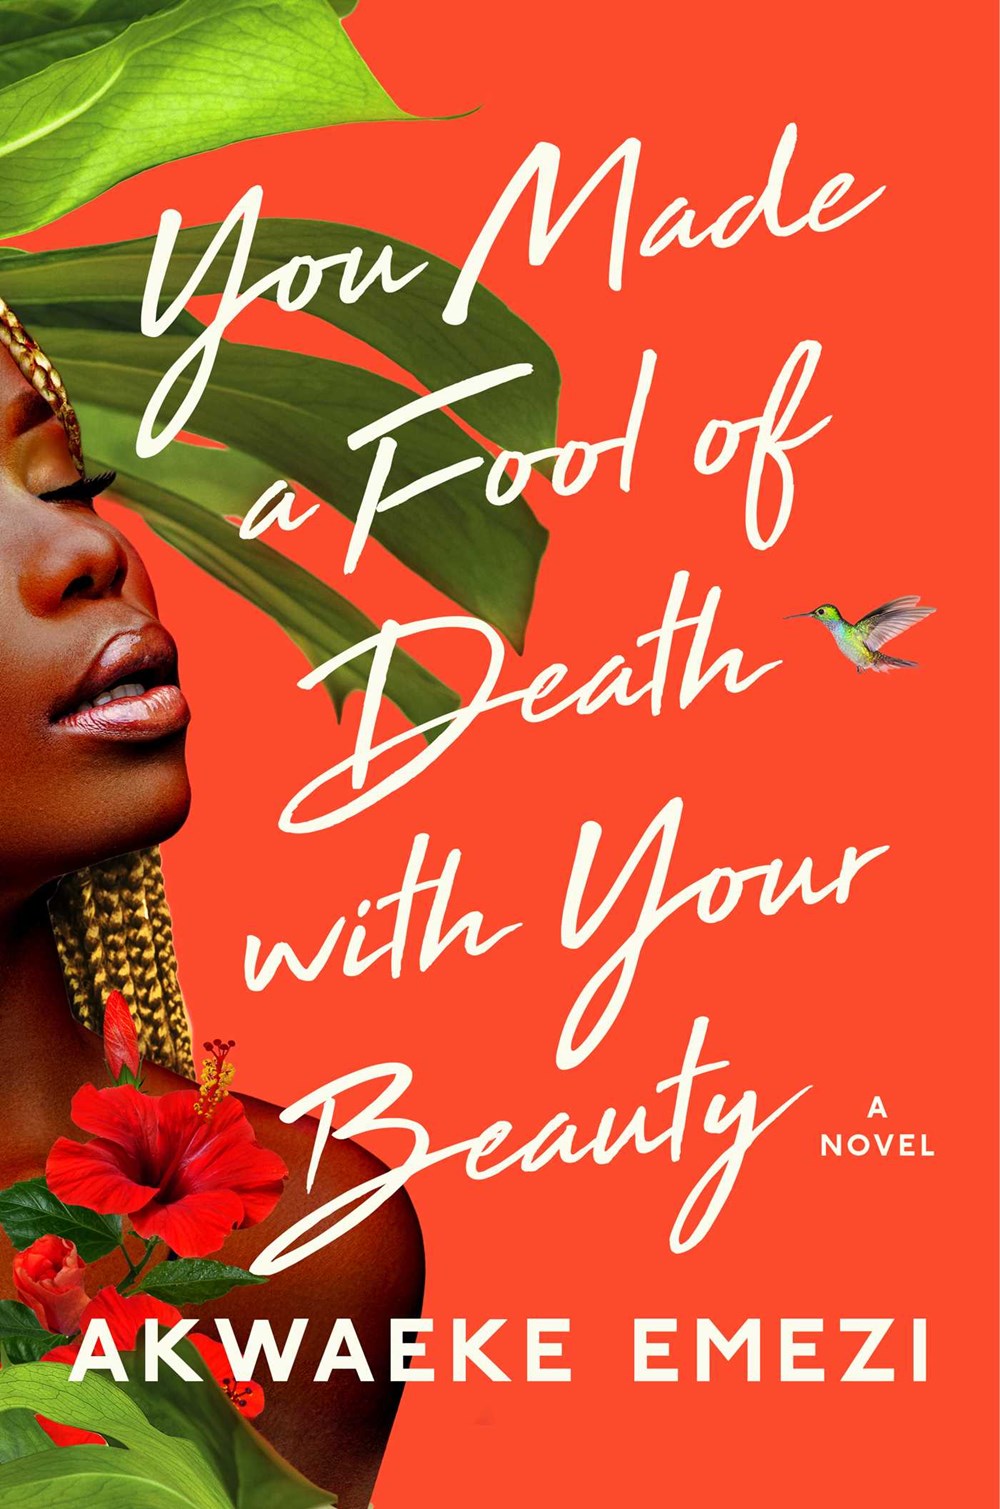 Embracing Another's Death as Beautiful – BK Books